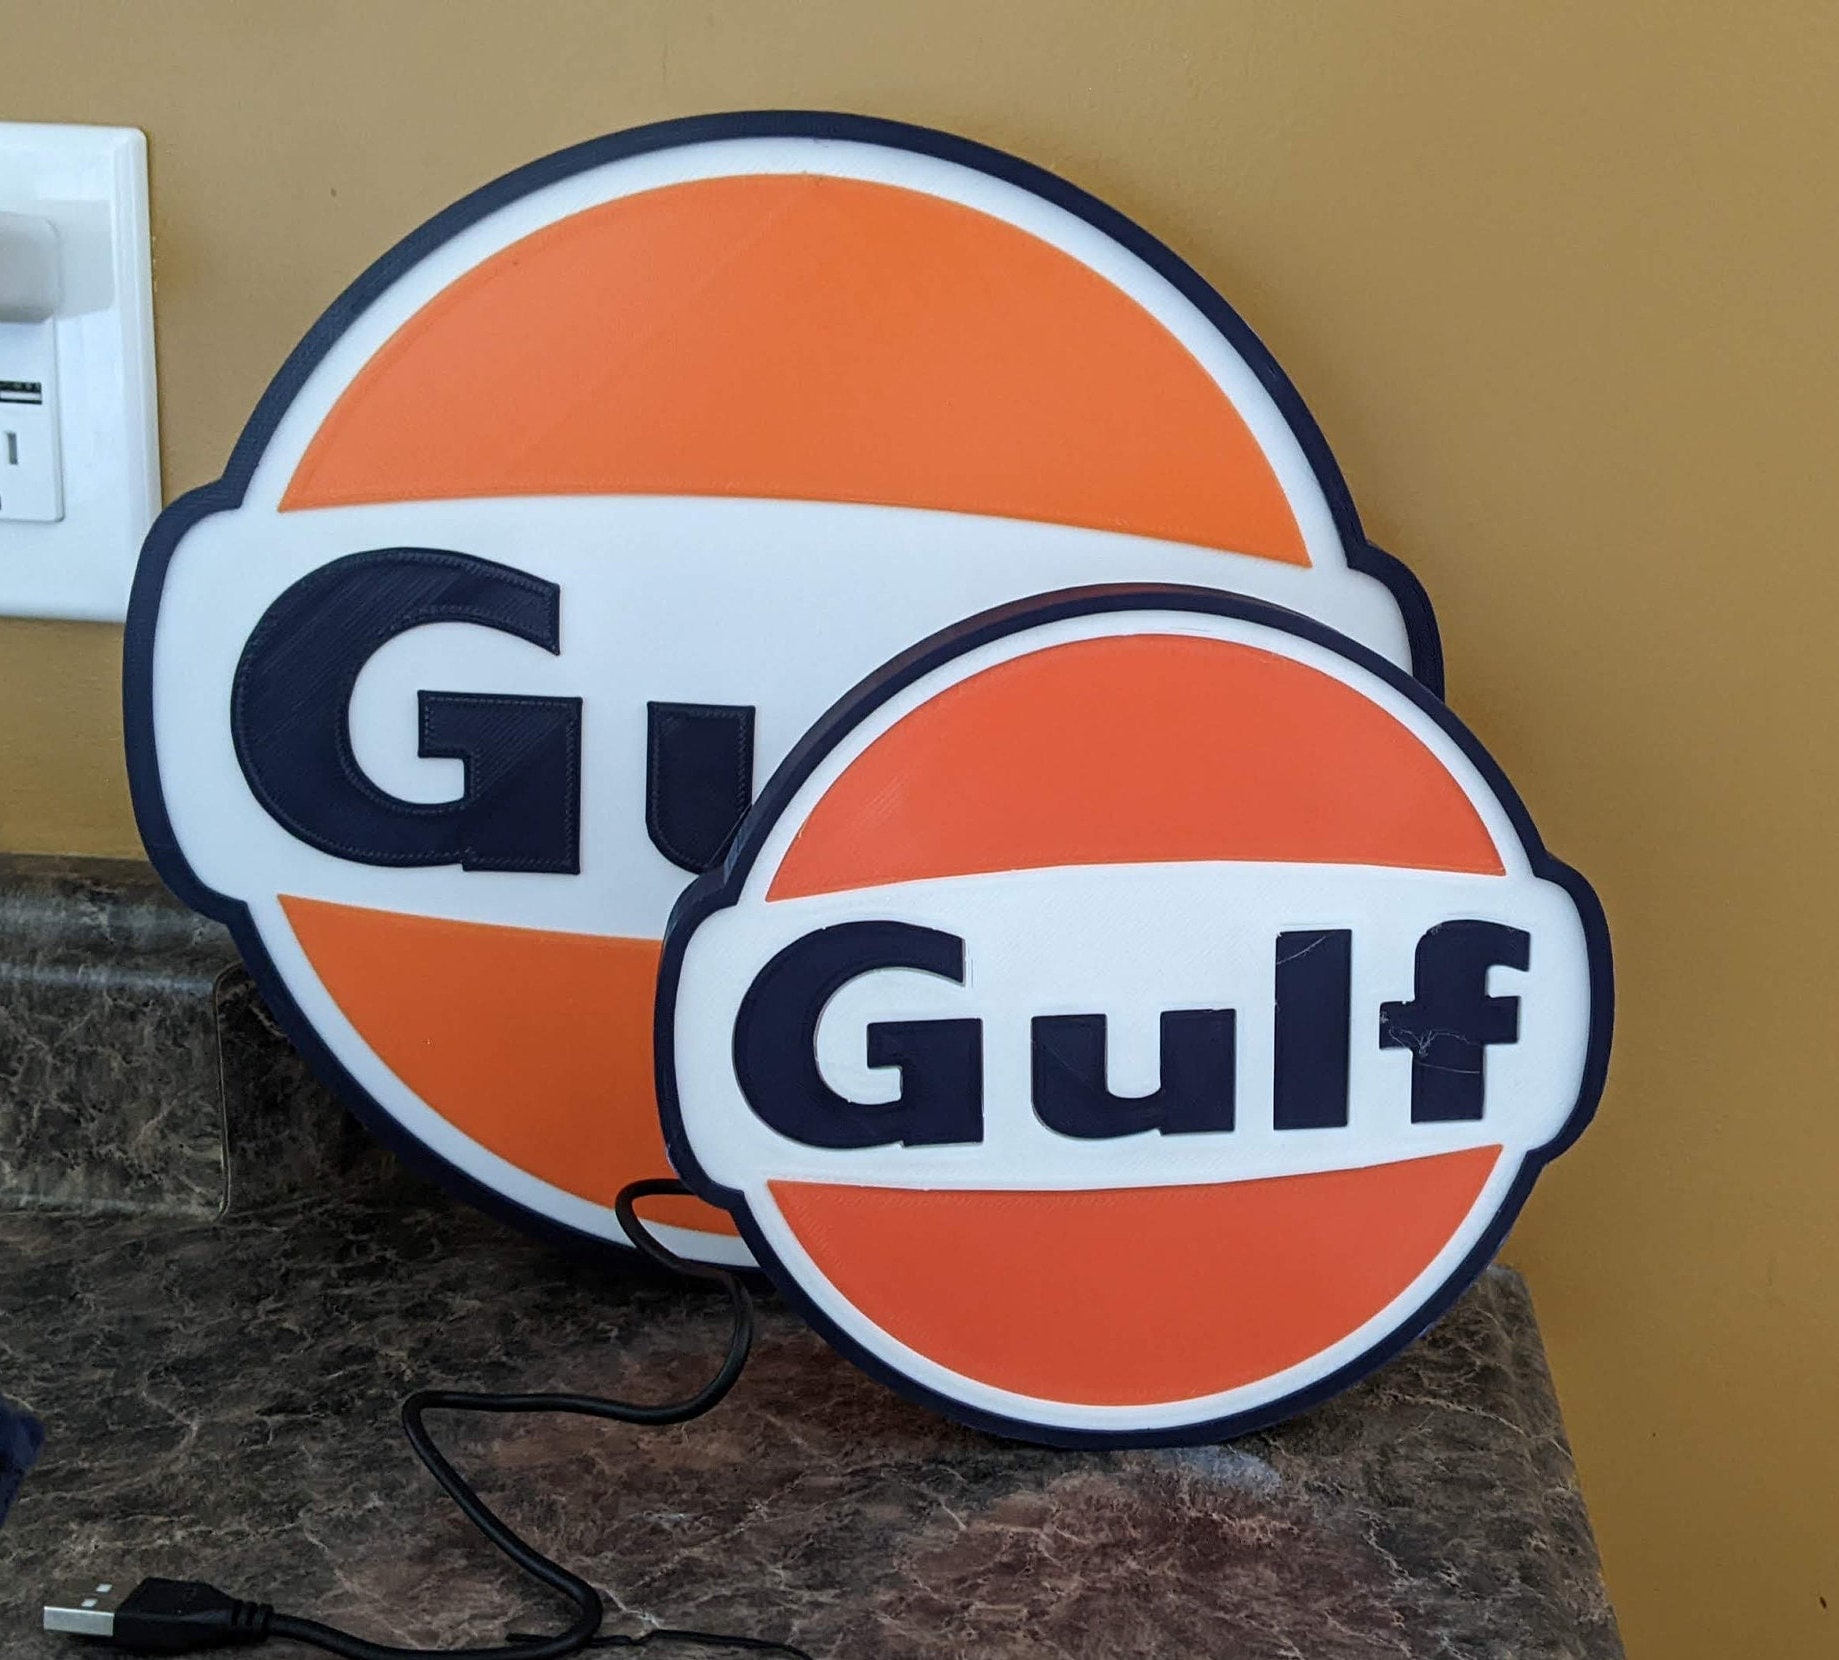 C1950s Gulfwax Gulf Wax Paraffine for Preserving Gulf Oil Corp. Gulf  Refining Co. Pittsburgh, PA., Gas Station Decor, Fruit Canning Jar 3 